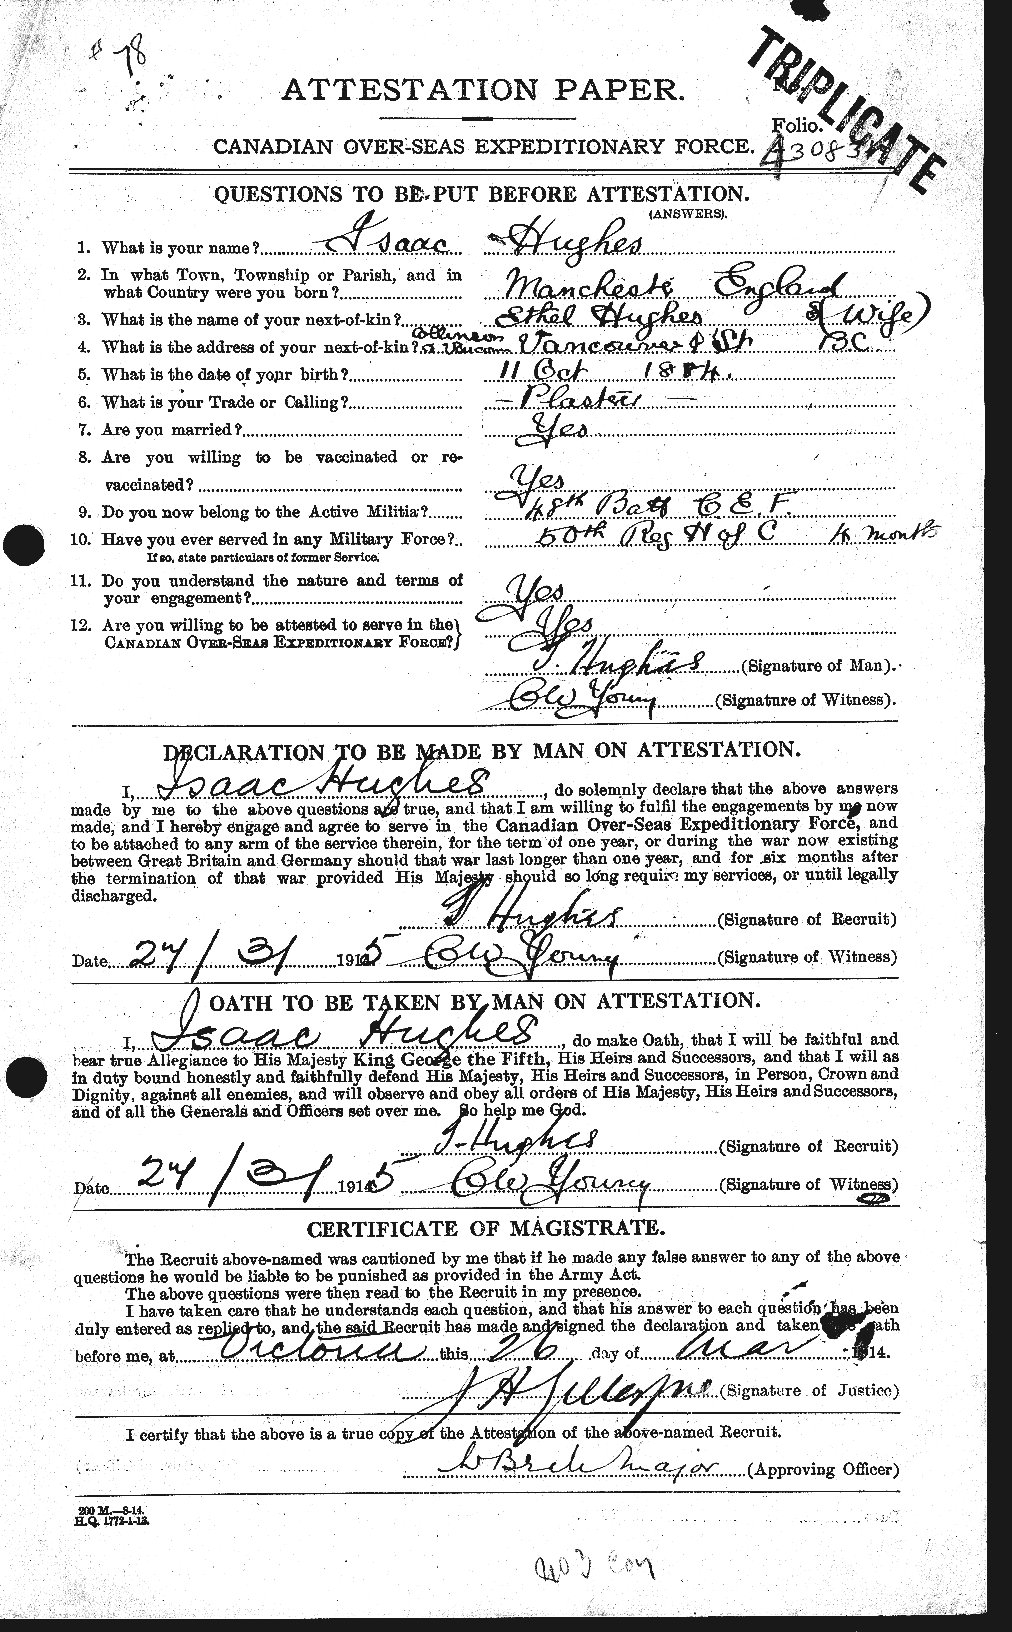 Personnel Records of the First World War - CEF 403934a